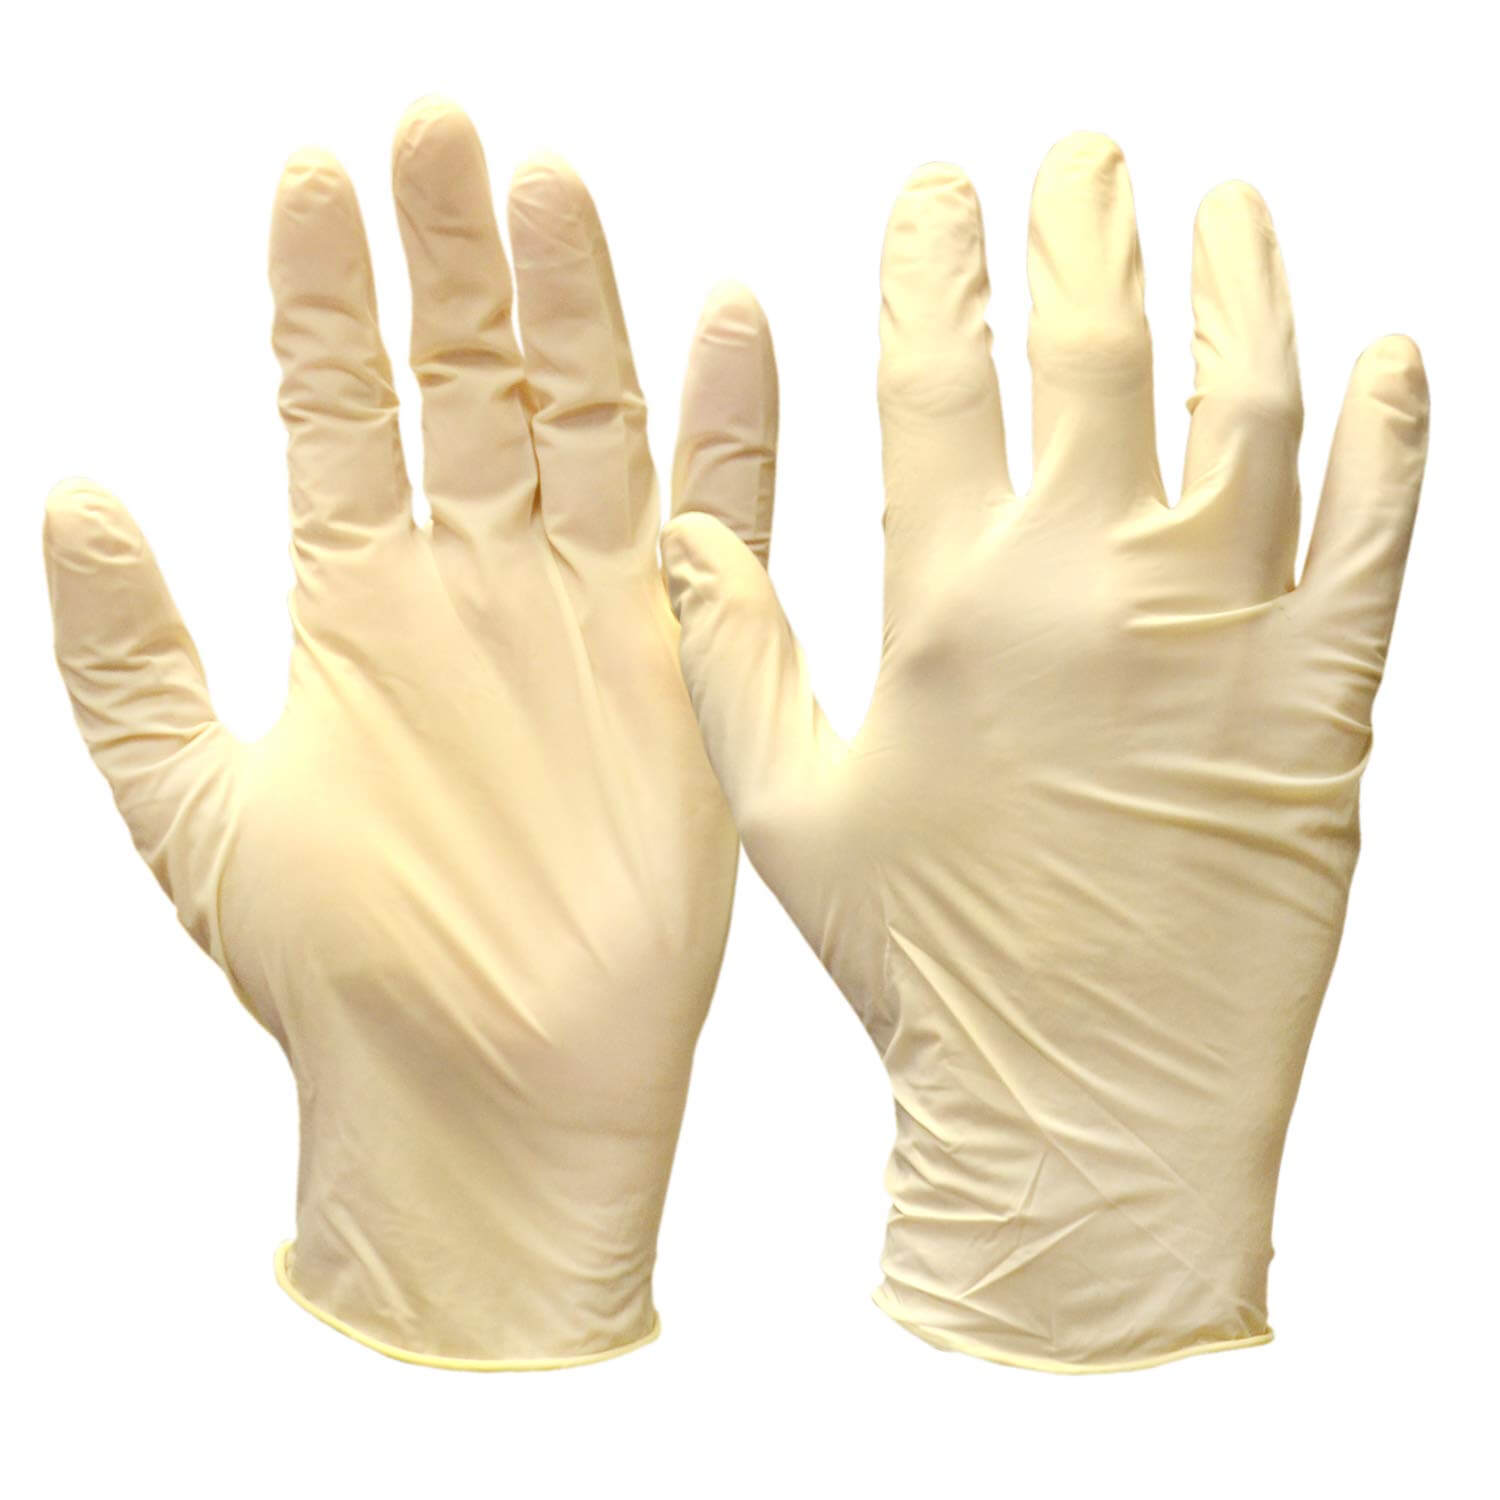 Powdered Large Latex Gloves - 100 Count